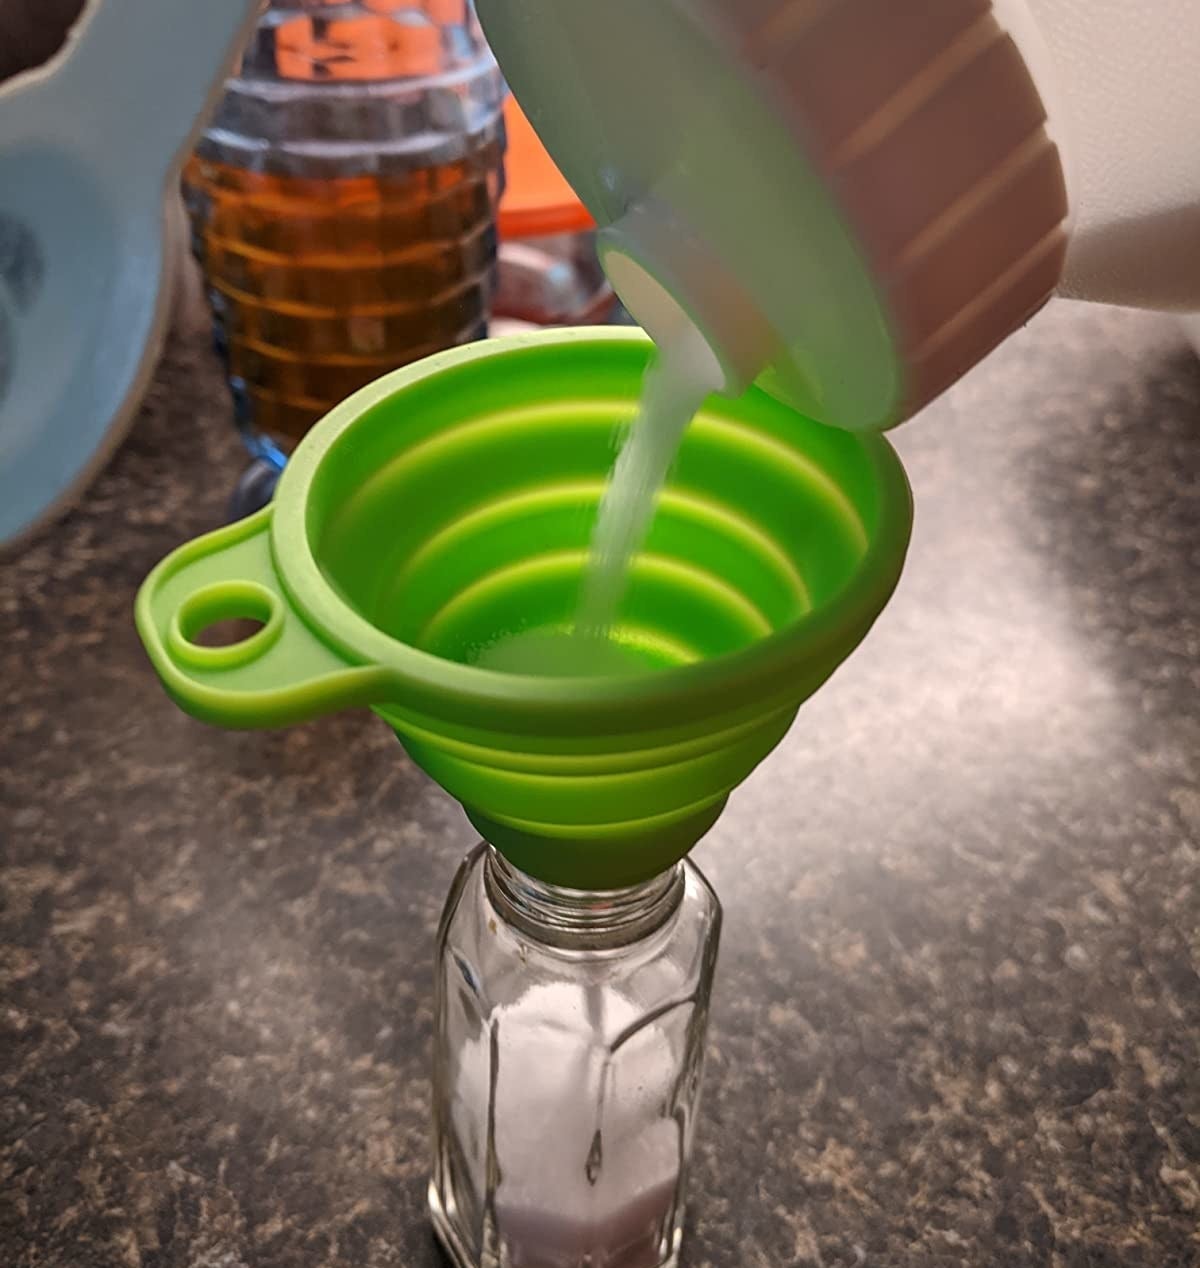 Reviewer image of green funnel being used to refill a salt shaker